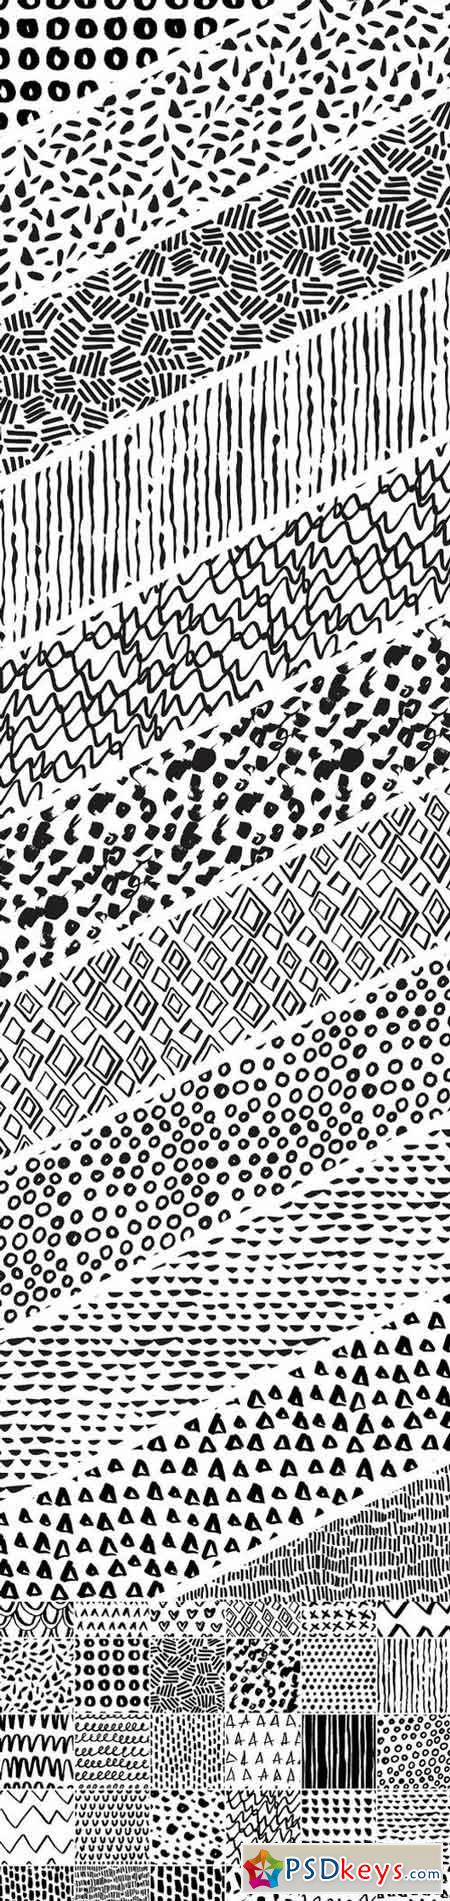 30 Simple Seamless Patterns 851799